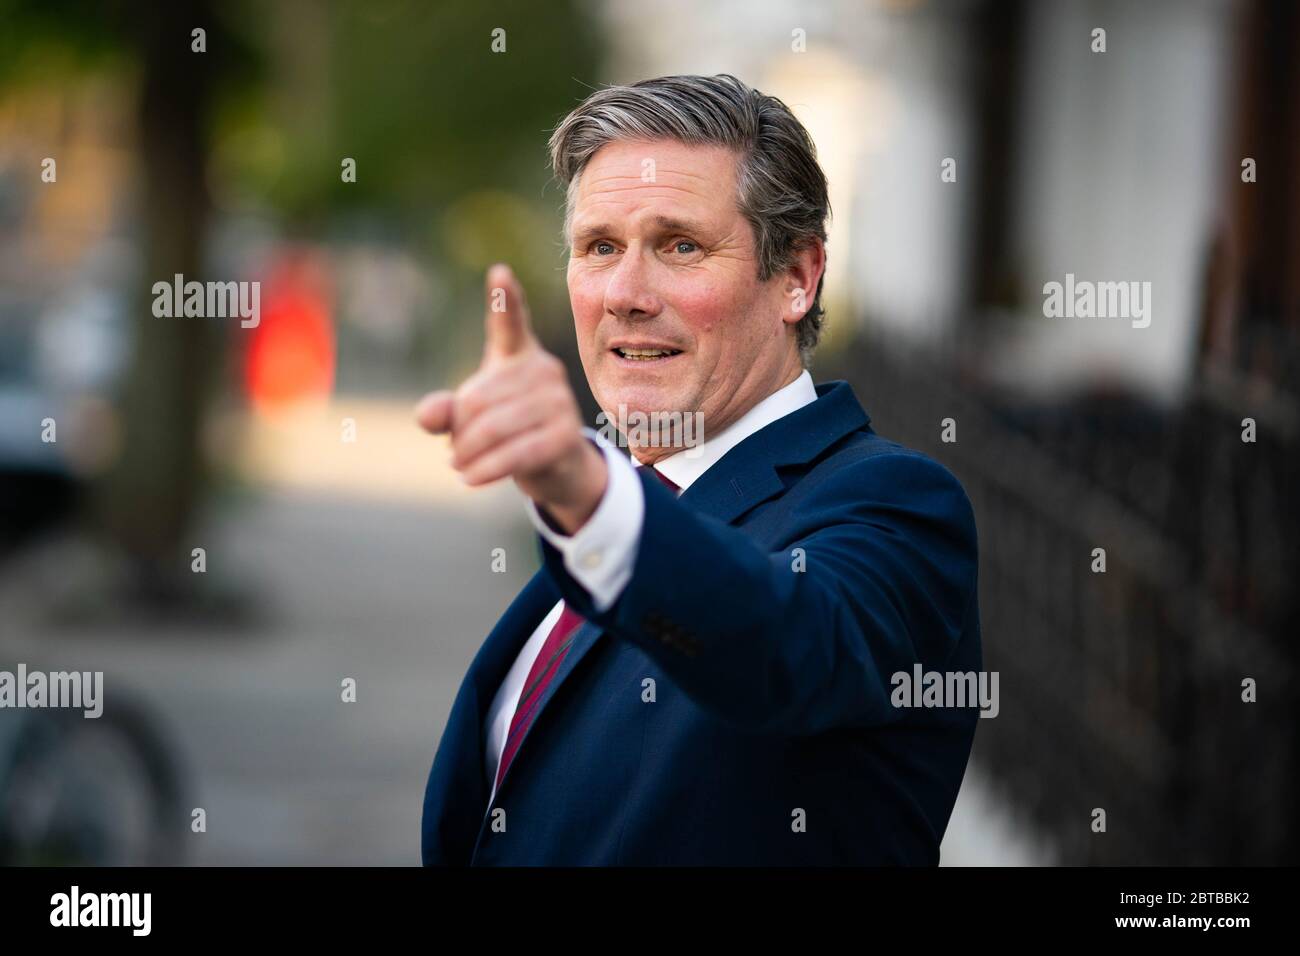 Labour leader Sir Keir Starmer issues a statement outside his home in north London, after Prime Minister Boris Johnson backed his de facto chief-of-staff Dominic Cummings following allegations he breached lockdown restrictions, as Mr Cummings had driven from his London home to Durham in March after his wife started displaying Covid-19 symptoms becoming fearful there would be no-one to look after his four-year-old child if he also took ill. Stock Photo